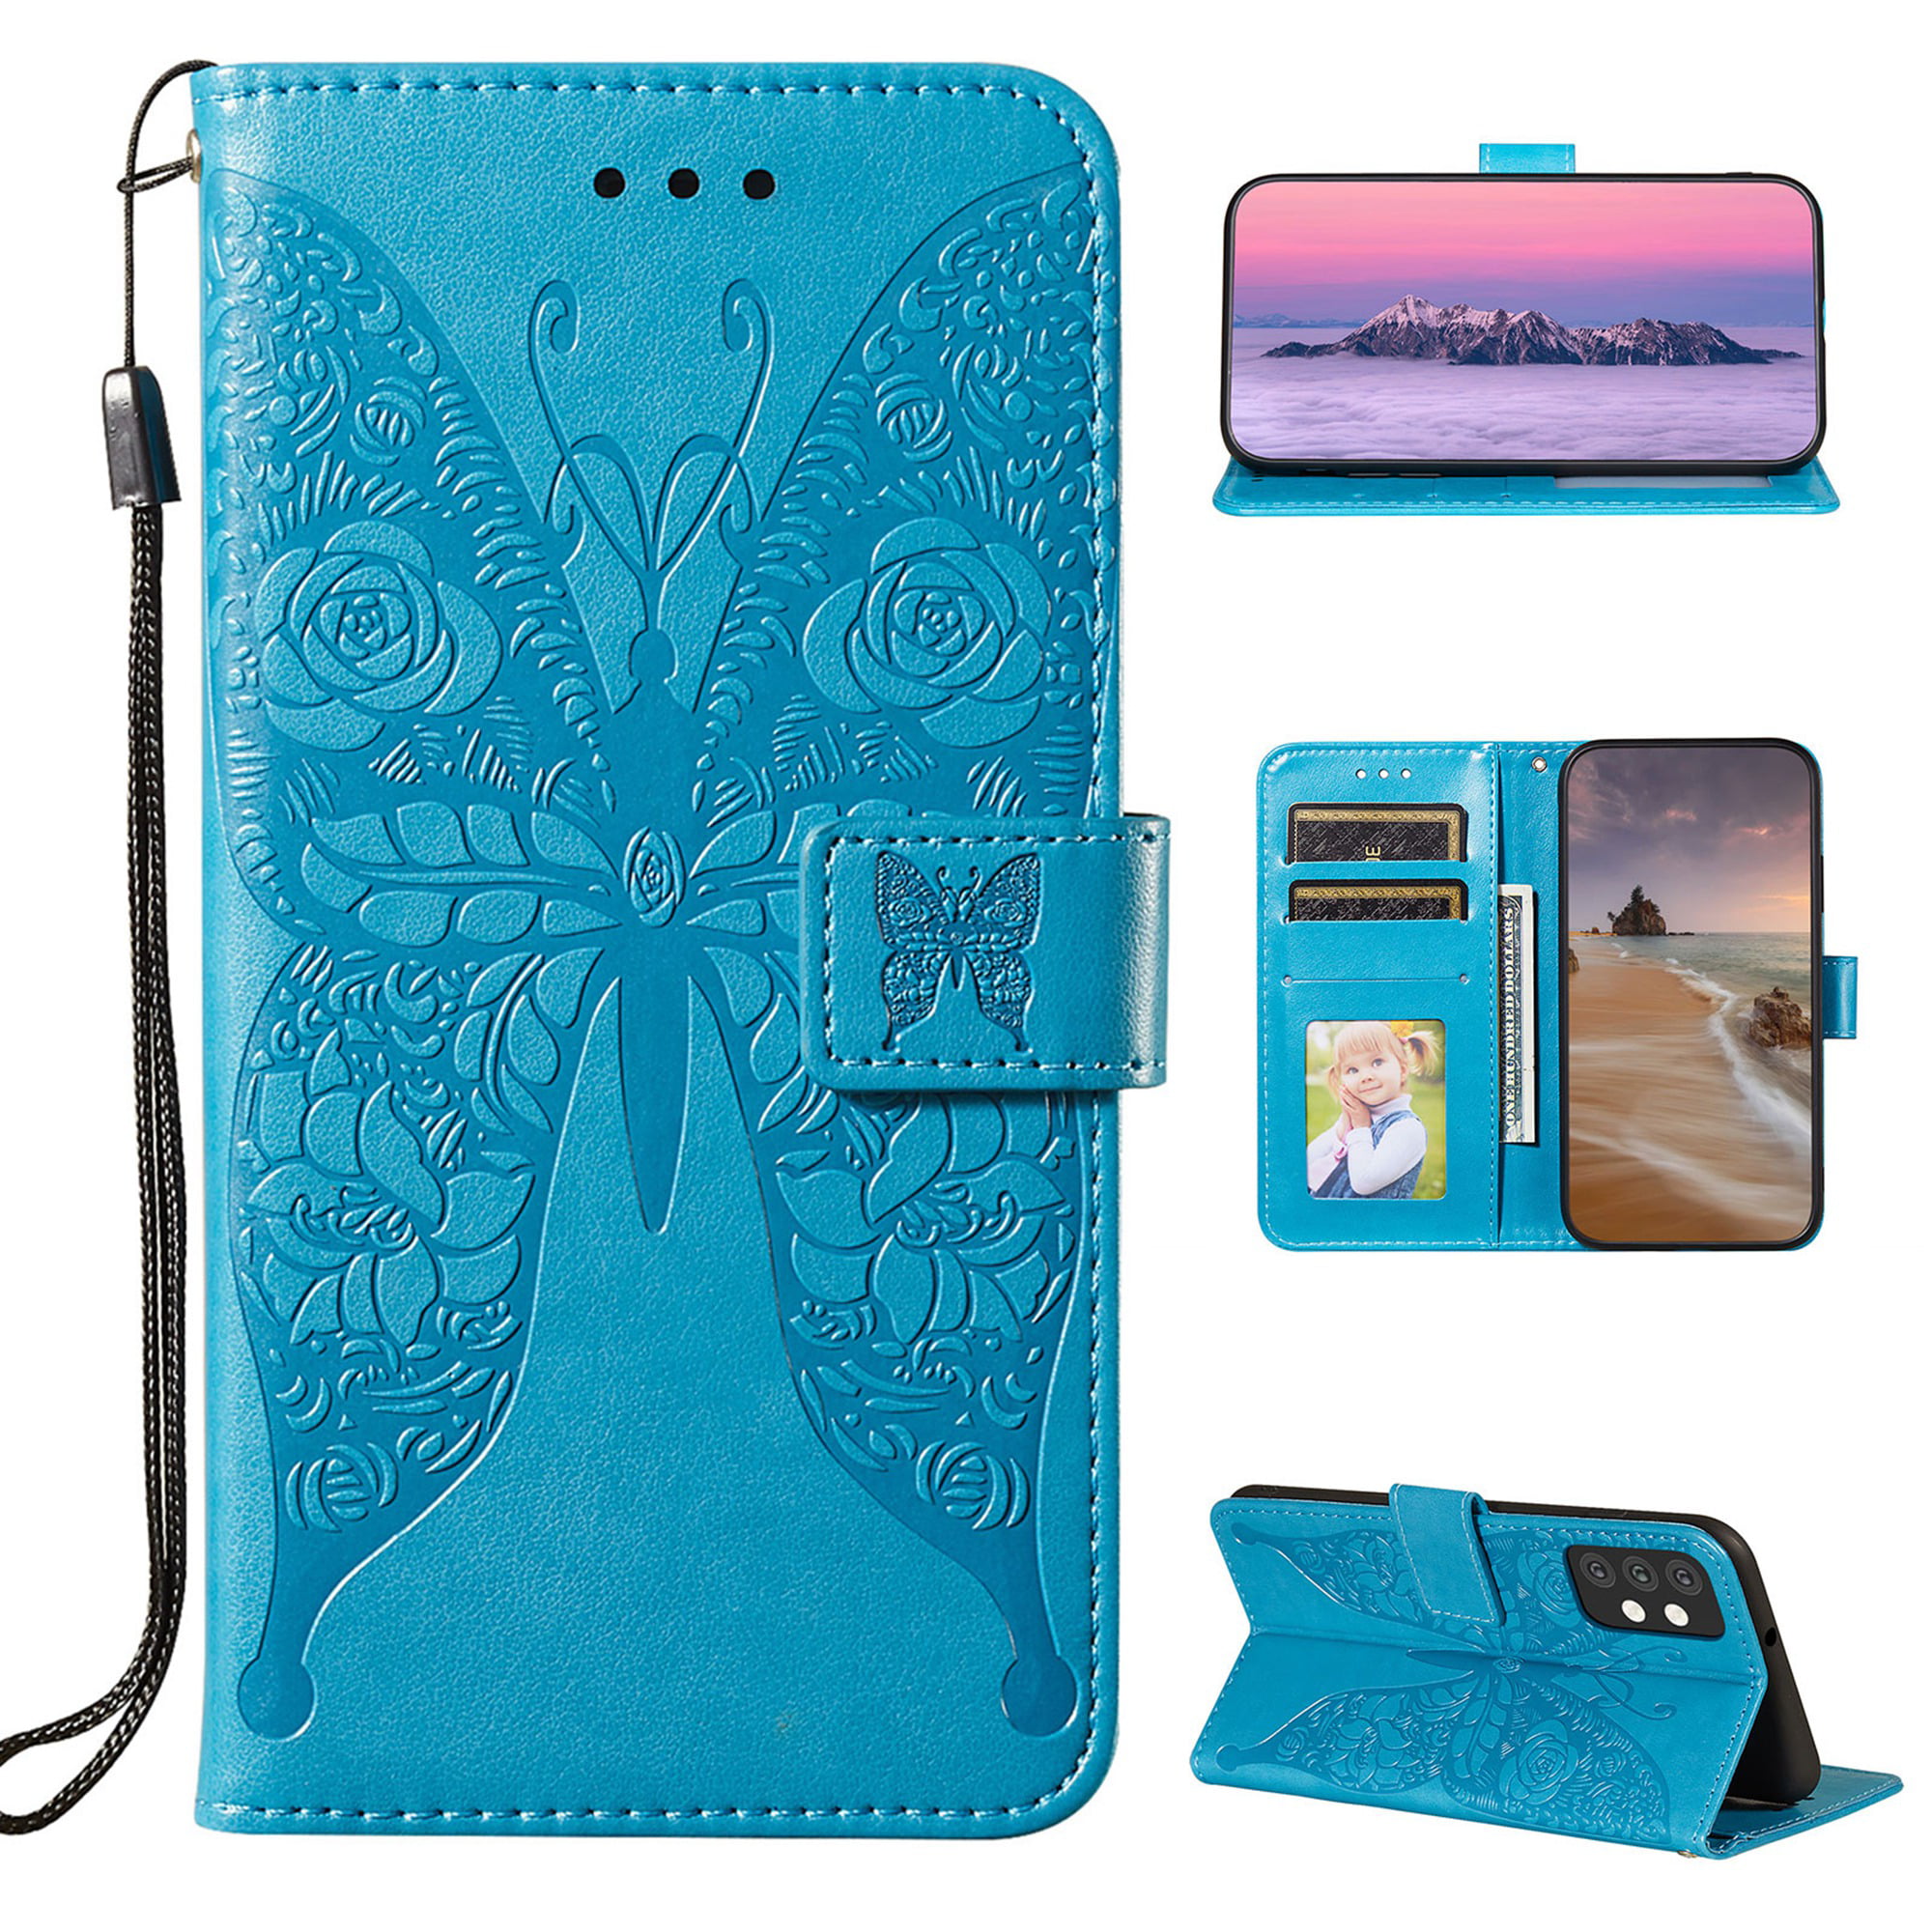 Case Protection Folding Bag Flip Cover Butterfly Wallet Bumper Cases 